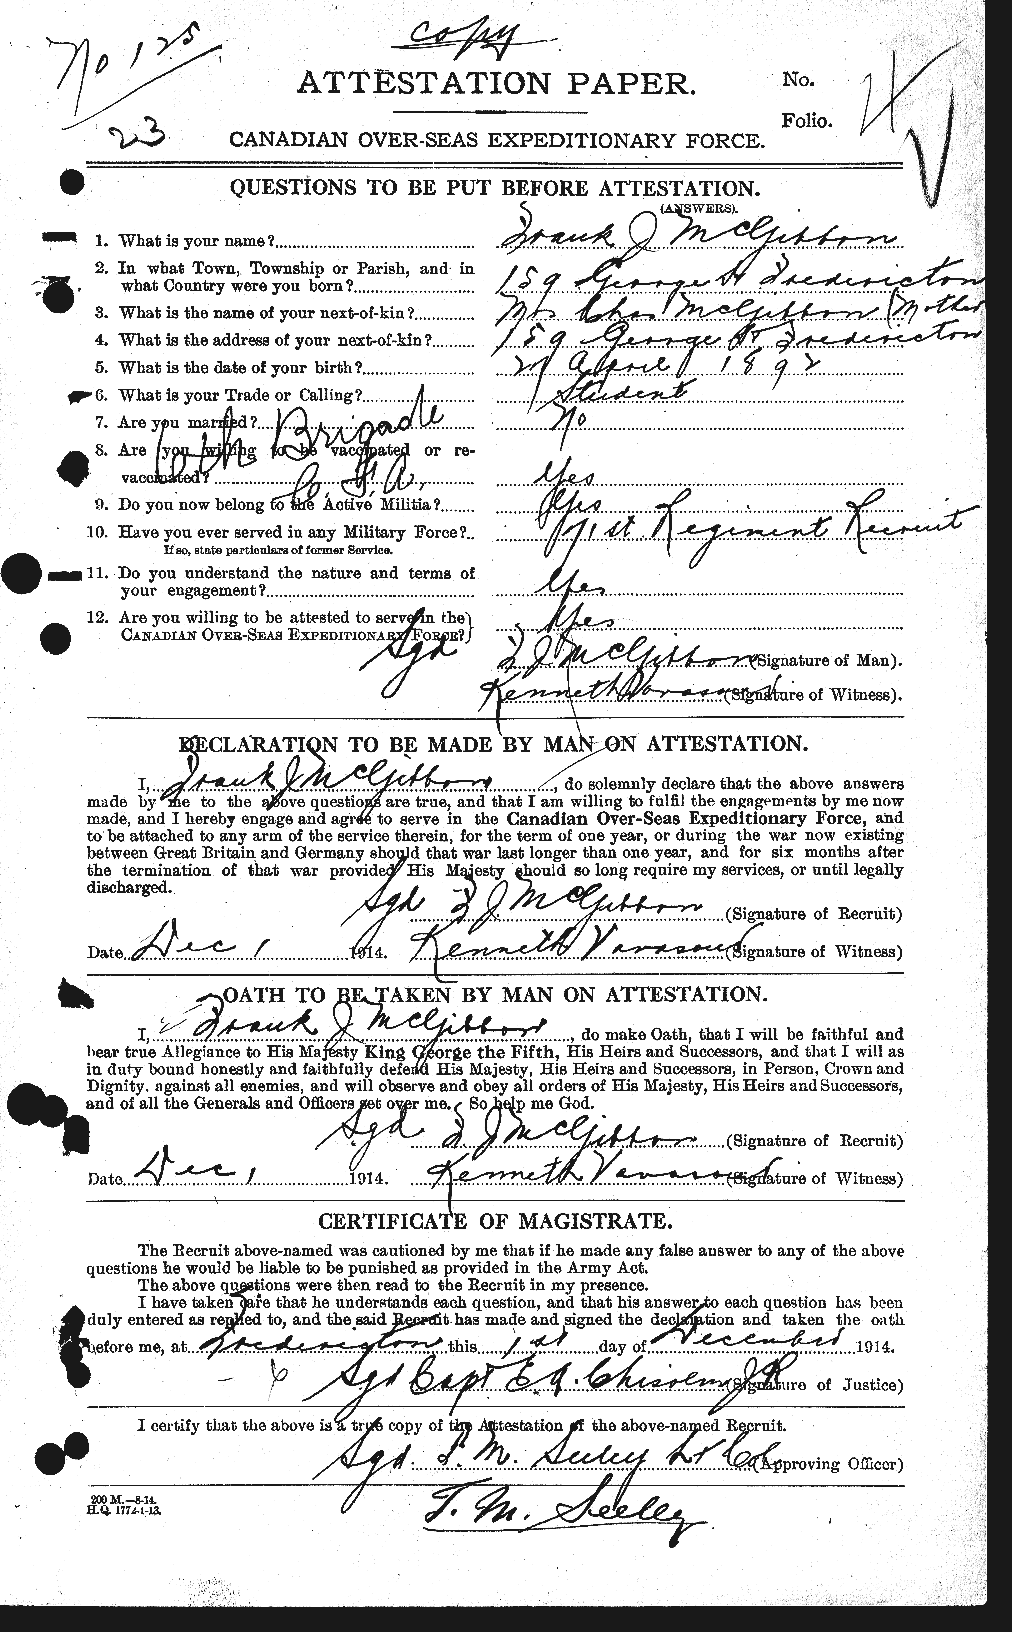 Personnel Records of the First World War - CEF 522484a